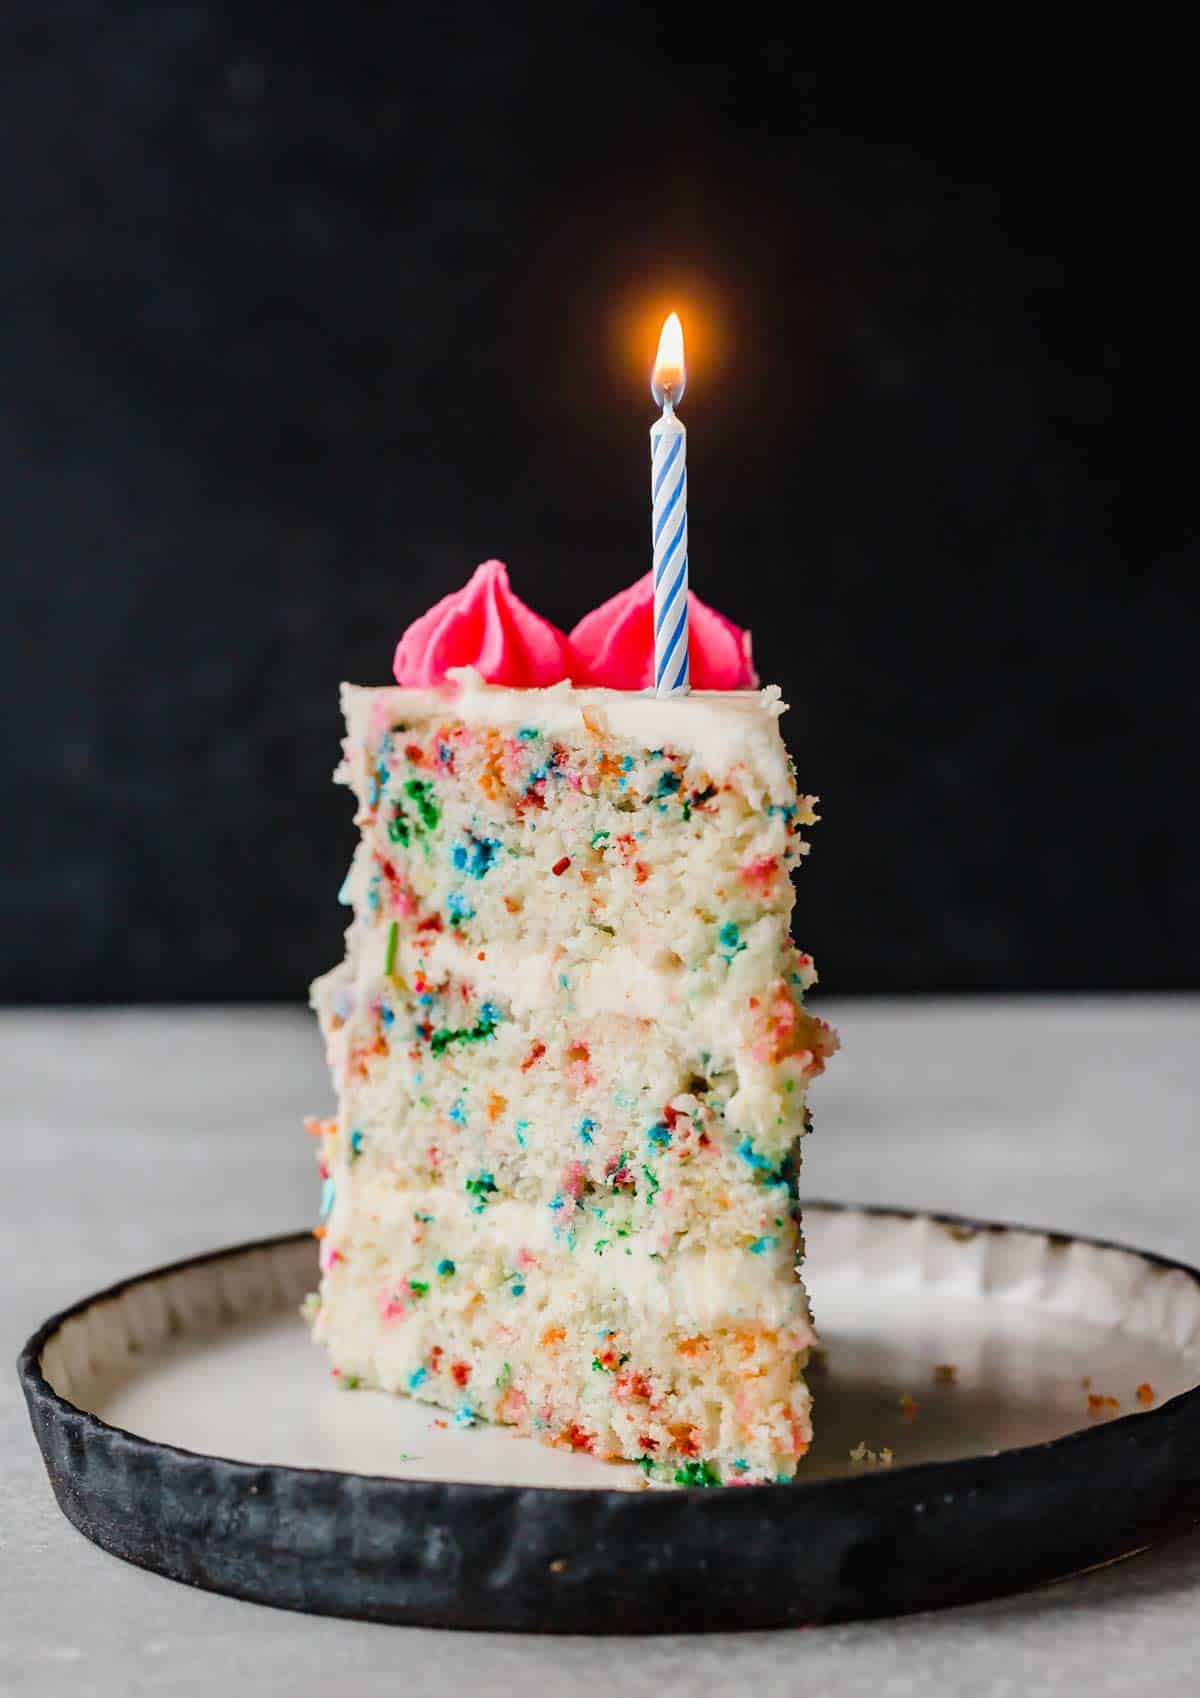 A slice of Funfetti Cake on a plate with a single blue candle lit on top of the slice.